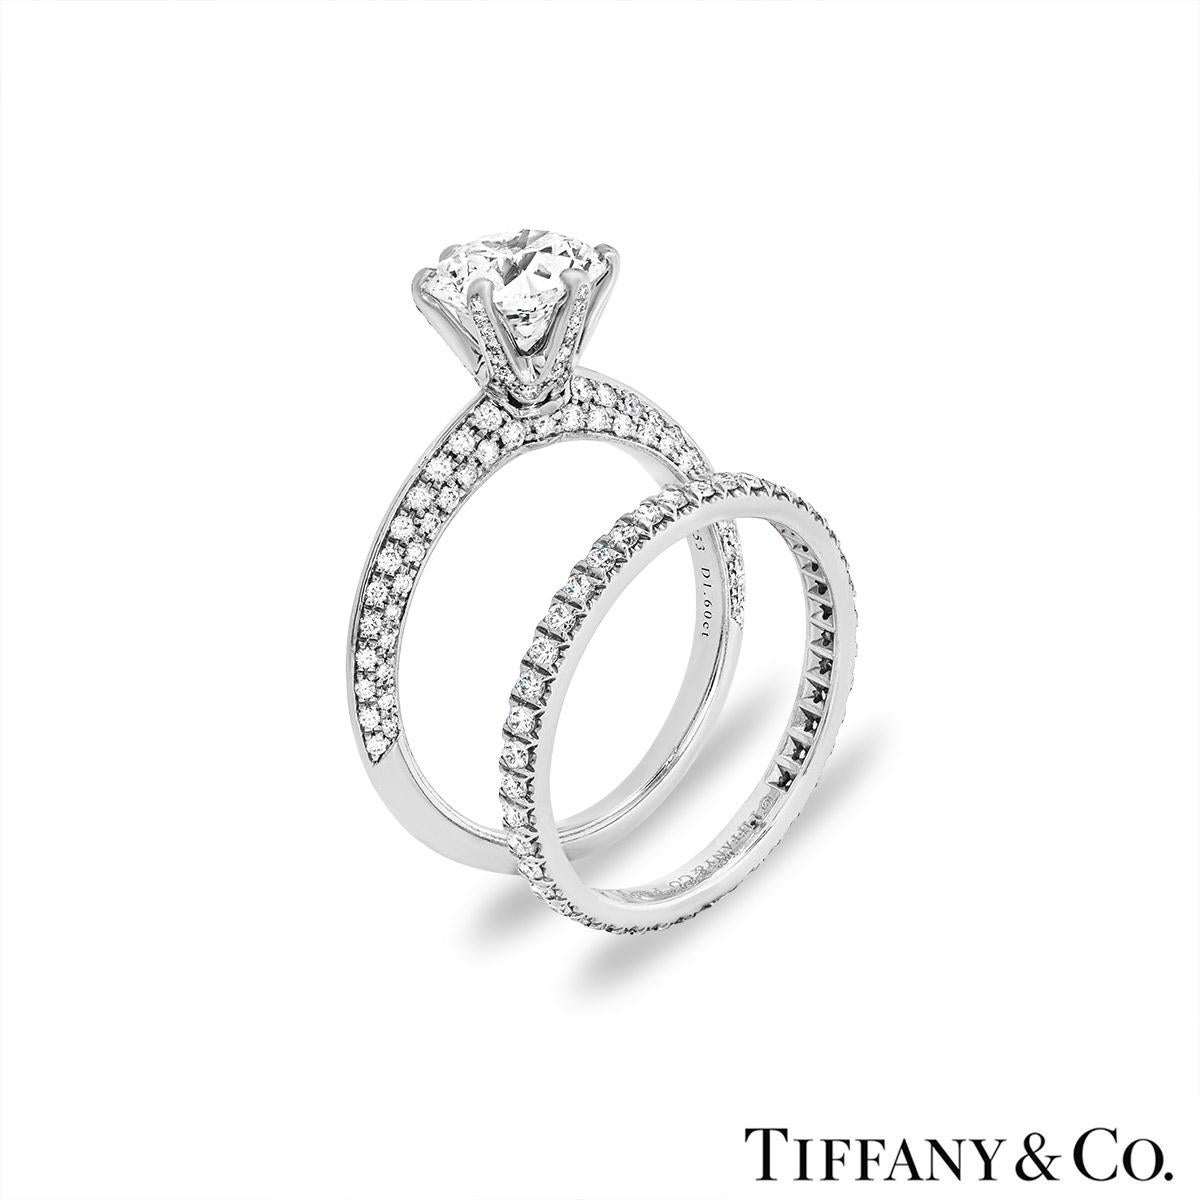 A breathtaking platinum diamond bridal set by Tiffany & Co. The engagement ring is set to the centre in a six prong mount with a round brilliant cut diamond weighing 1.60ct, F colour and VVS2 clarity. The diamond scores an excellent rating in all